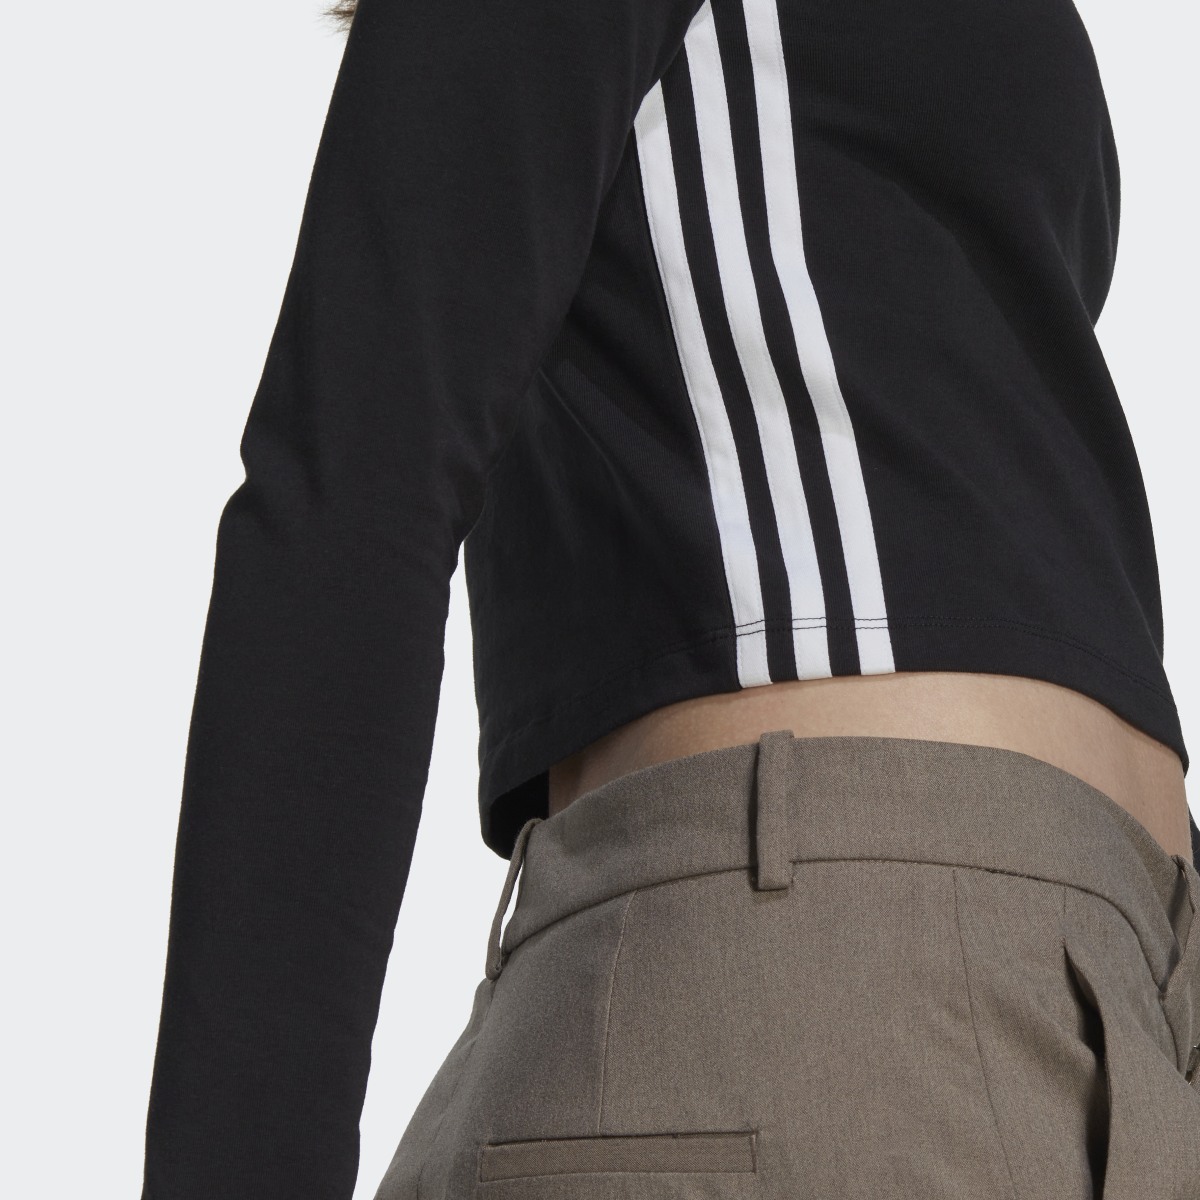 Adidas Centre Stage Cutout Top. 7